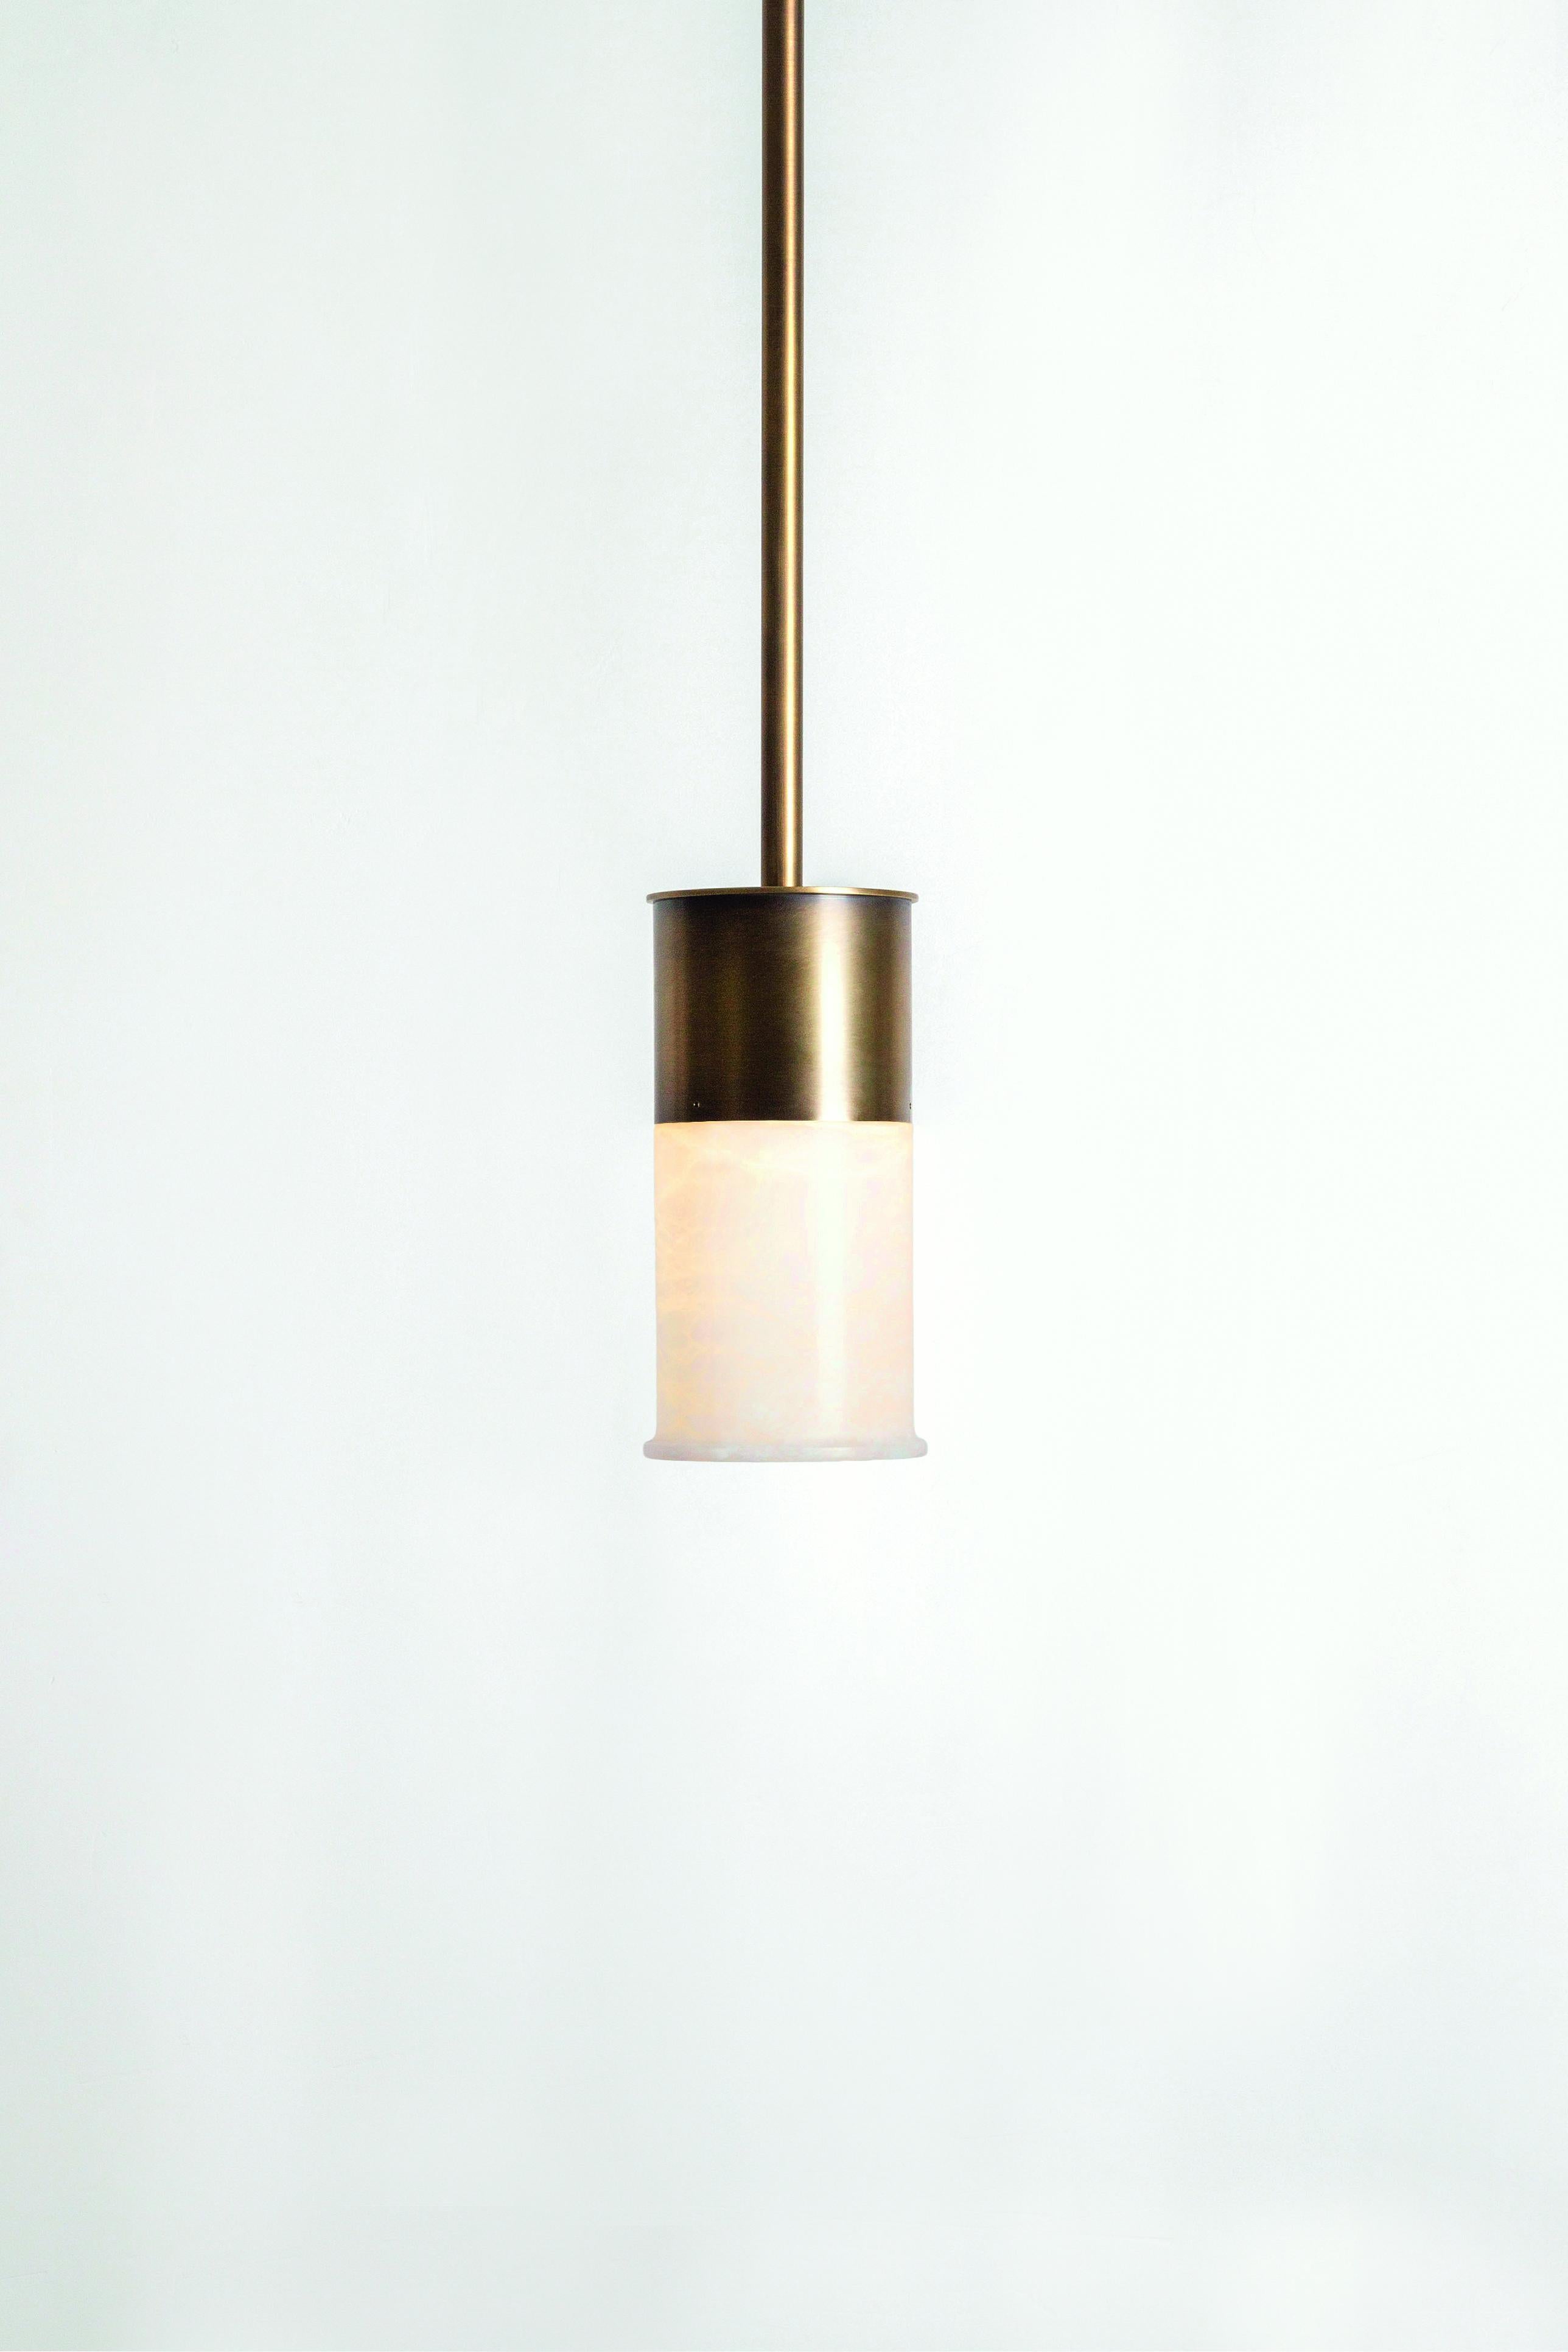 The Erato Pendant by GARNIER ET LINKER belongs to the ERATO collection, a contemporary reinterpretation of the candelabra bracket: the alabaster replaces the candle inside a patinated brass structure.

GARNIER ET LINKER is a Paris based design